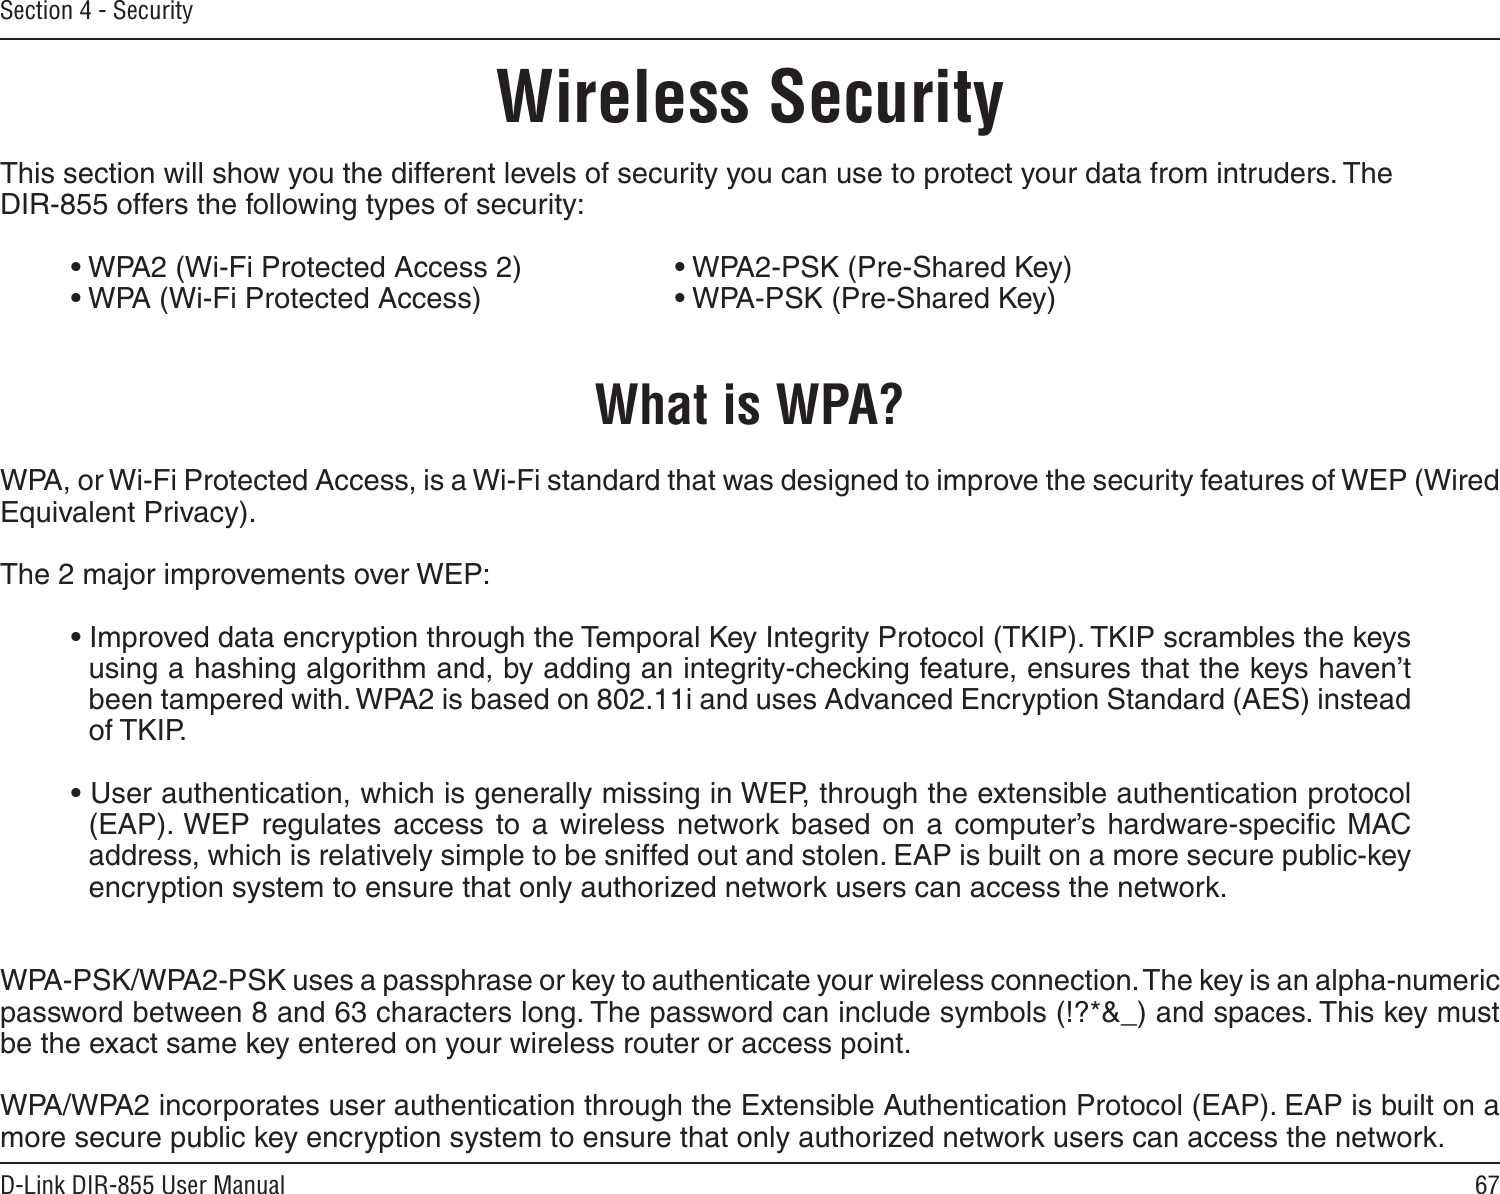 67D-Link DIR-855 User ManualSection 4 - SecurityWireless SecurityThis section will show you the different levels of security you can use to protect your data from intruders. The DIR-855 offers the following types of security:• WPA2 (Wi-Fi Protected Access 2)     • WPA2-PSK (Pre-Shared Key)• WPA (Wi-Fi Protected Access)      • WPA-PSK (Pre-Shared Key)What is WPA?WPA, or Wi-Fi Protected Access, is a Wi-Fi standard that was designed to improve the security features of WEP (Wired Equivalent Privacy).  The 2 major improvements over WEP: • Improved data encryption through the Temporal Key Integrity Protocol (TKIP). TKIP scrambles the keys using a hashing algorithm and, by adding an integrity-checking feature, ensures that the keys haven’t been tampered with. WPA2 is based on 802.11i and uses Advanced Encryption Standard (AES) instead of TKIP.• User authentication, which is generally missing in WEP, through the extensible authentication protocol (EAP). WEP  regulates  access  to  a  wireless  network  based  on  a  computer’s  hardware-speciﬁc MAC address, which is relatively simple to be sniffed out and stolen. EAP is built on a more secure public-key encryption system to ensure that only authorized network users can access the network.WPA-PSK/WPA2-PSK uses a passphrase or key to authenticate your wireless connection. The key is an alpha-numeric password between 8 and 63 characters long. The password can include symbols (!?*&amp;_) and spaces. This key must be the exact same key entered on your wireless router or access point.WPA/WPA2 incorporates user authentication through the Extensible Authentication Protocol (EAP). EAP is built on a more secure public key encryption system to ensure that only authorized network users can access the network.